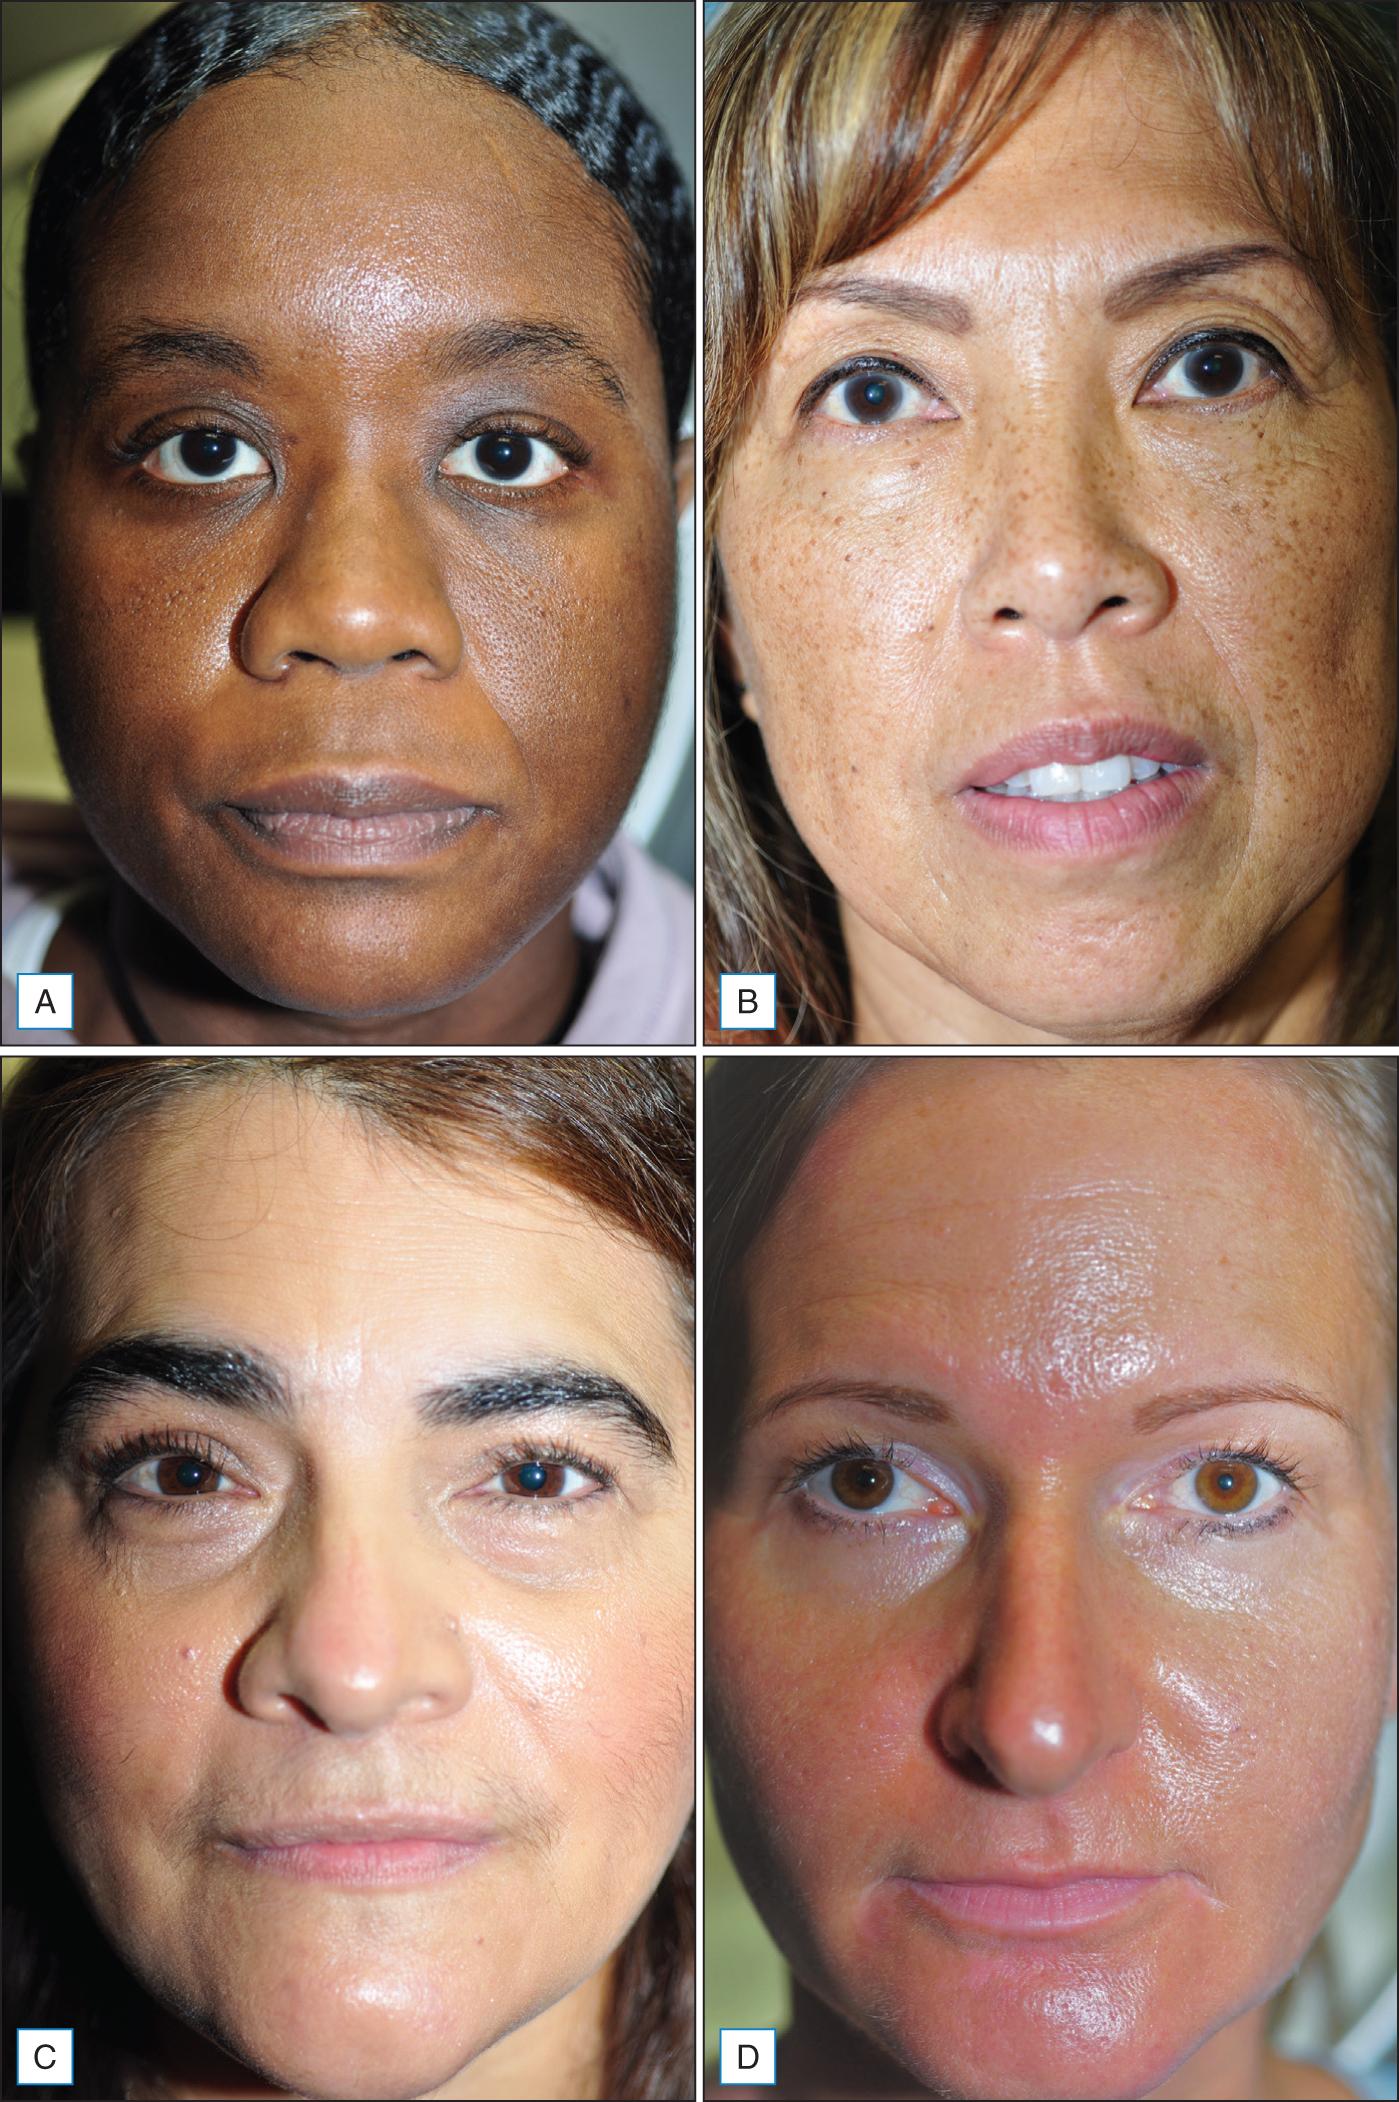 Fig. 24.1, Facial aging in an (A) African American woman, (B) Asian woman, (C) Hispanic woman, and (D) Caucasian woman who are between 50 and 60 years of age. Note the prominent nasolabial folds in the African American patient, the accumulation of lentigines in the Asian patient, and the infraorbital hollowing in the Hispanic patient, as compared to more rhytides in the Caucasian patient.